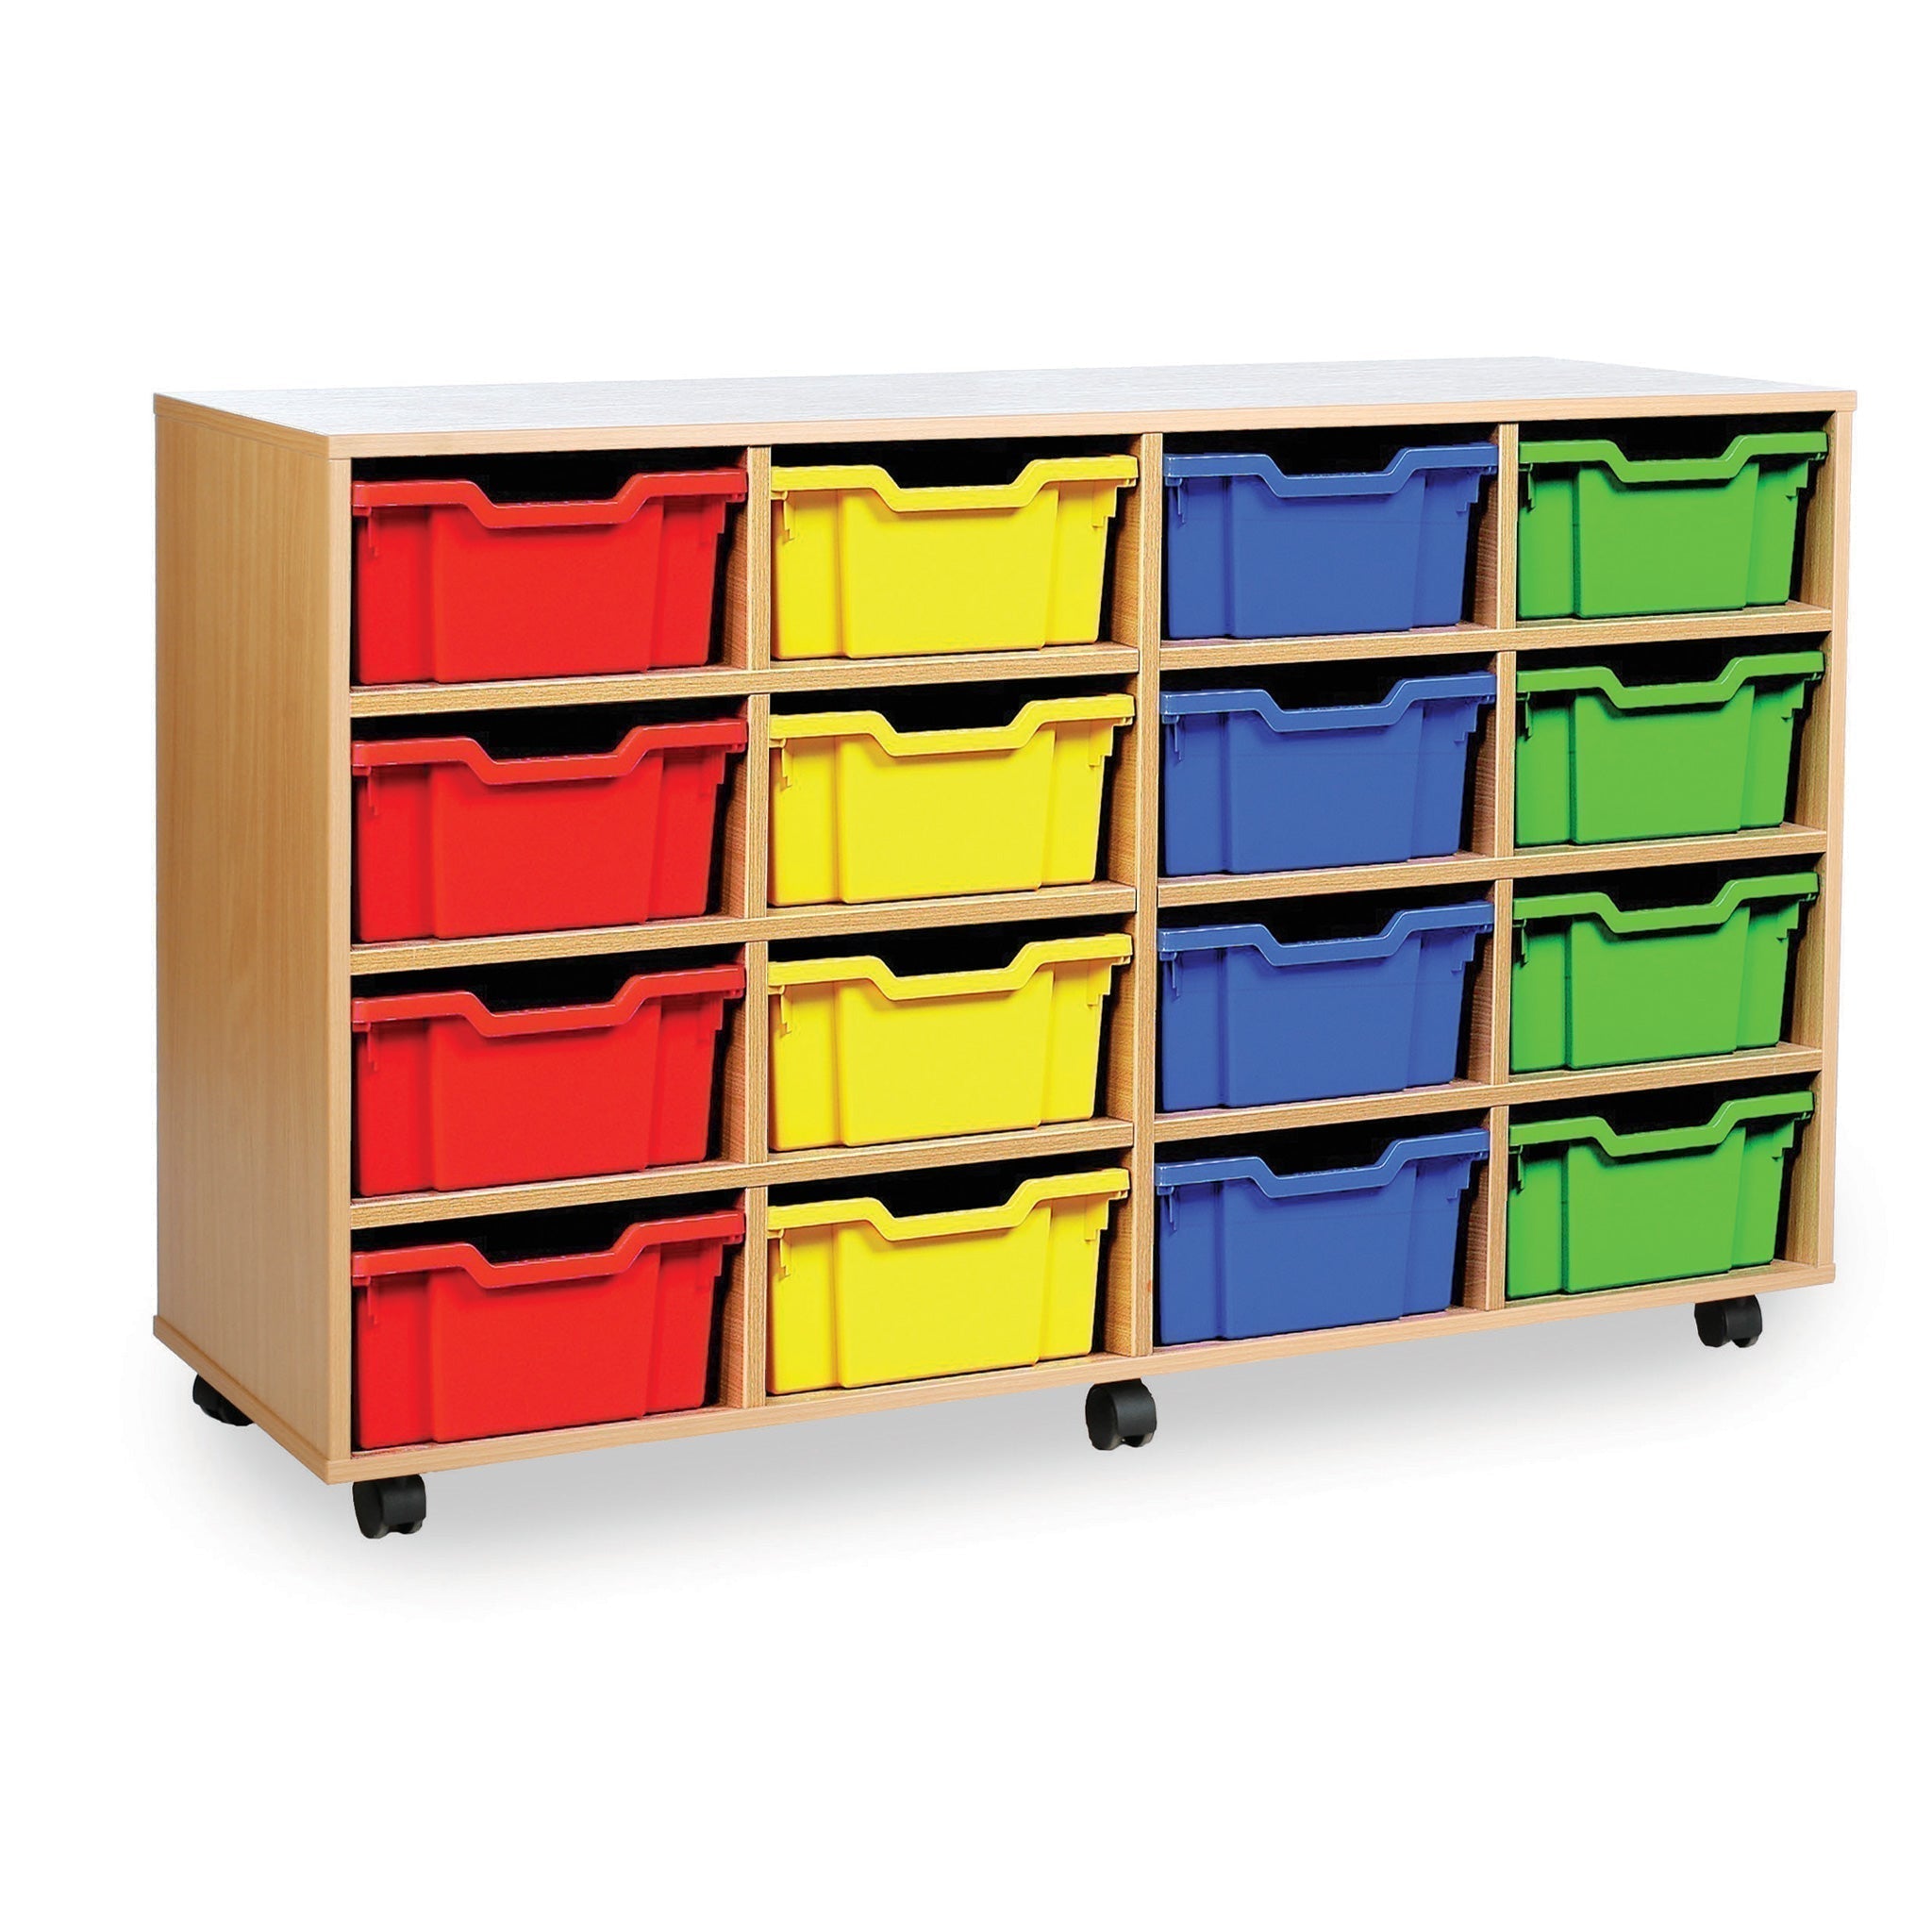 Monarch deep tray storage unit, The Monarch Deep Tray Storage Unit offers a robust and highly functional storage solution, perfect for classroom settings or other spaces requiring organized storage. Built for durability and ease of use, this unit is a sensible choice for environments that need to withstand daily wear and tear. Monarch Deep Tray Storage Unit Features: Versatile Storage Options The unit is available in three different configurations—12, 16, or 18 deep trays—providing ample space to store a va